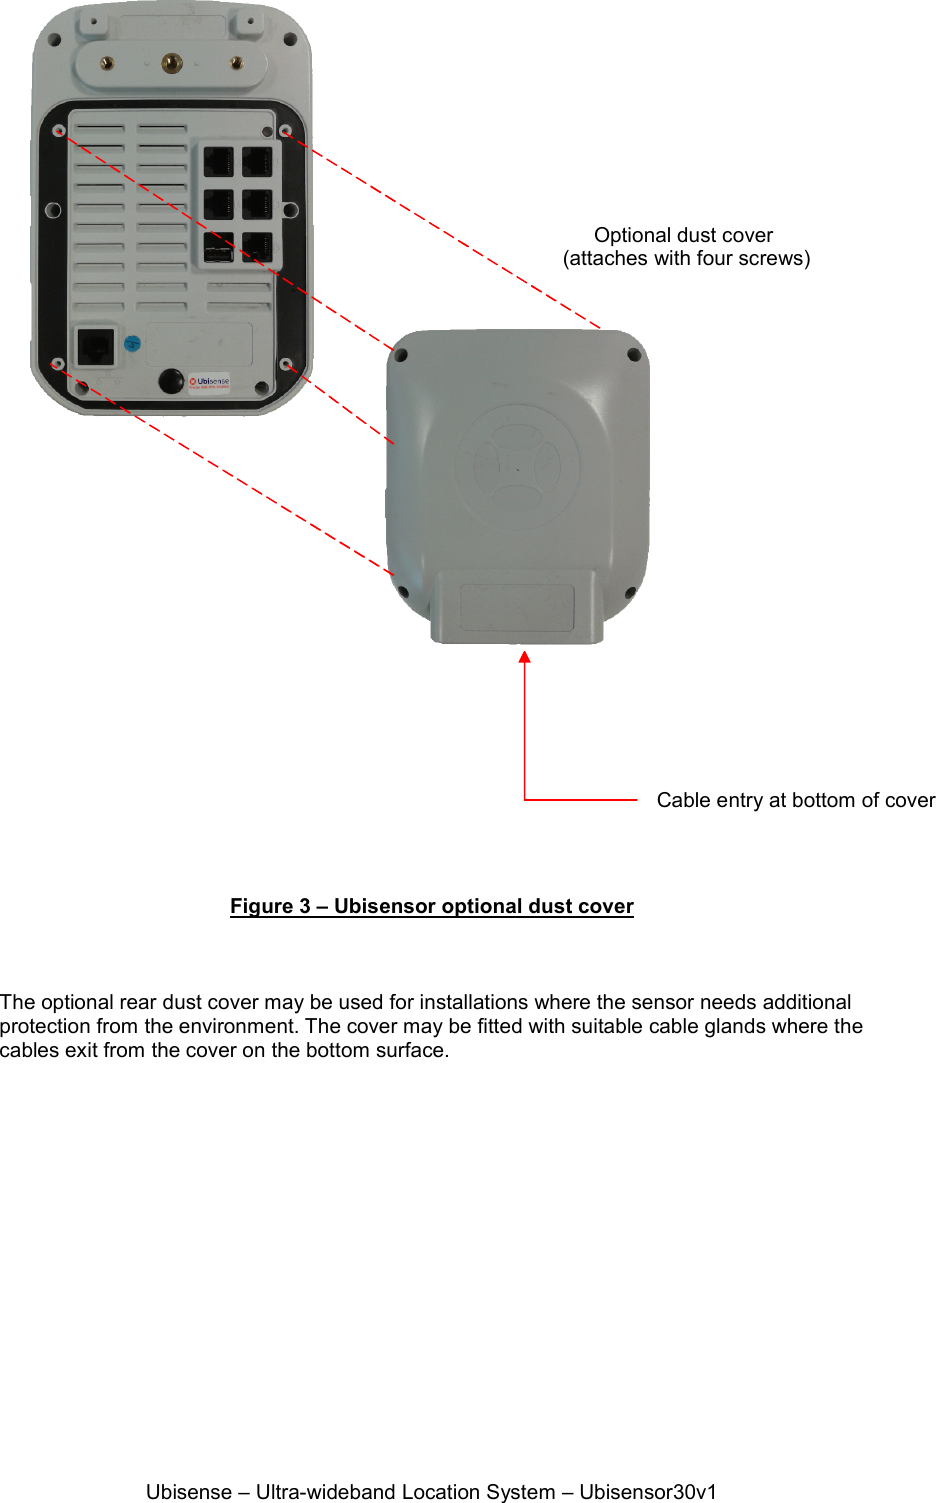 Ubisense – Ultra-wideband Location System – Ubisensor30v1                   Figure 3 – Ubisensor optional dust cover    The optional rear dust cover may be used for installations where the sensor needs additional protection from the environment. The cover may be fitted with suitable cable glands where the cables exit from the cover on the bottom surface. Optional dust cover  (attaches with four screws) Cable entry at bottom of cover 